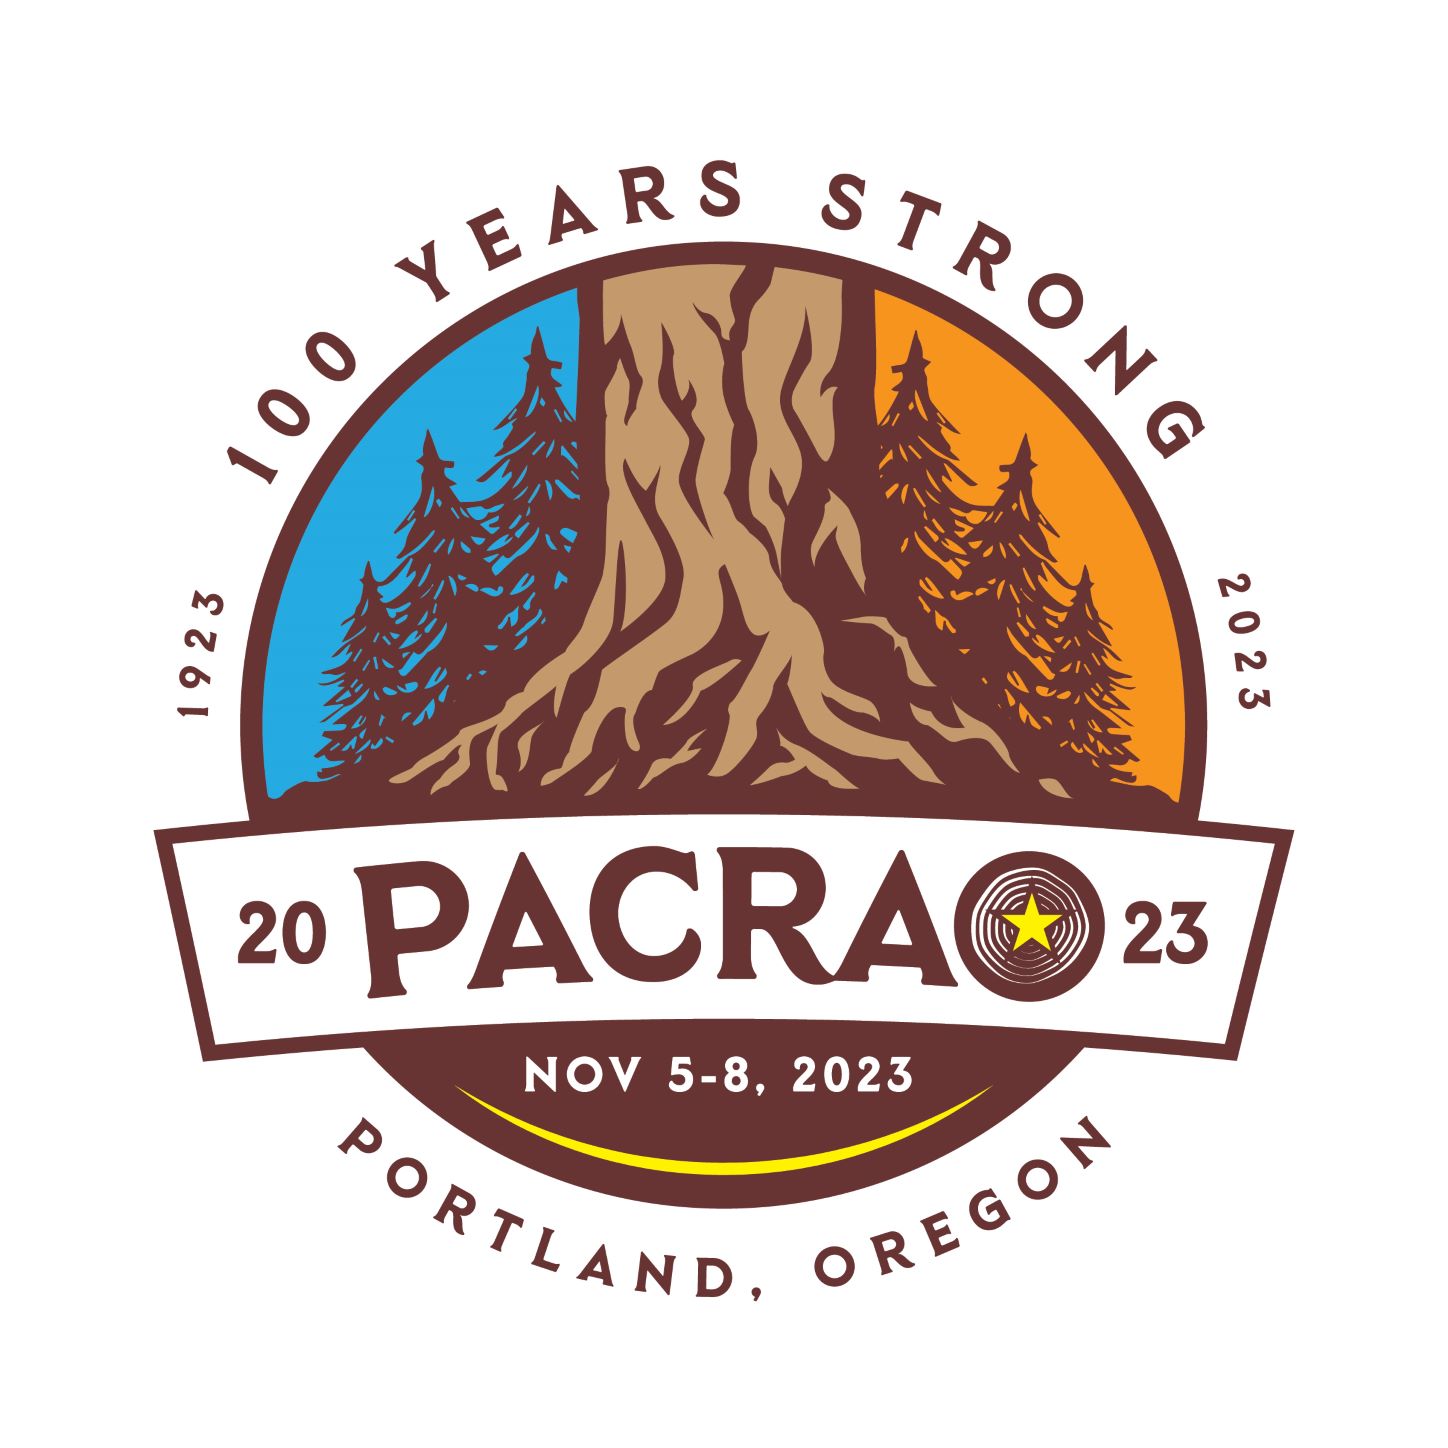 graphic of the logo for the PACRAO 2022 conference